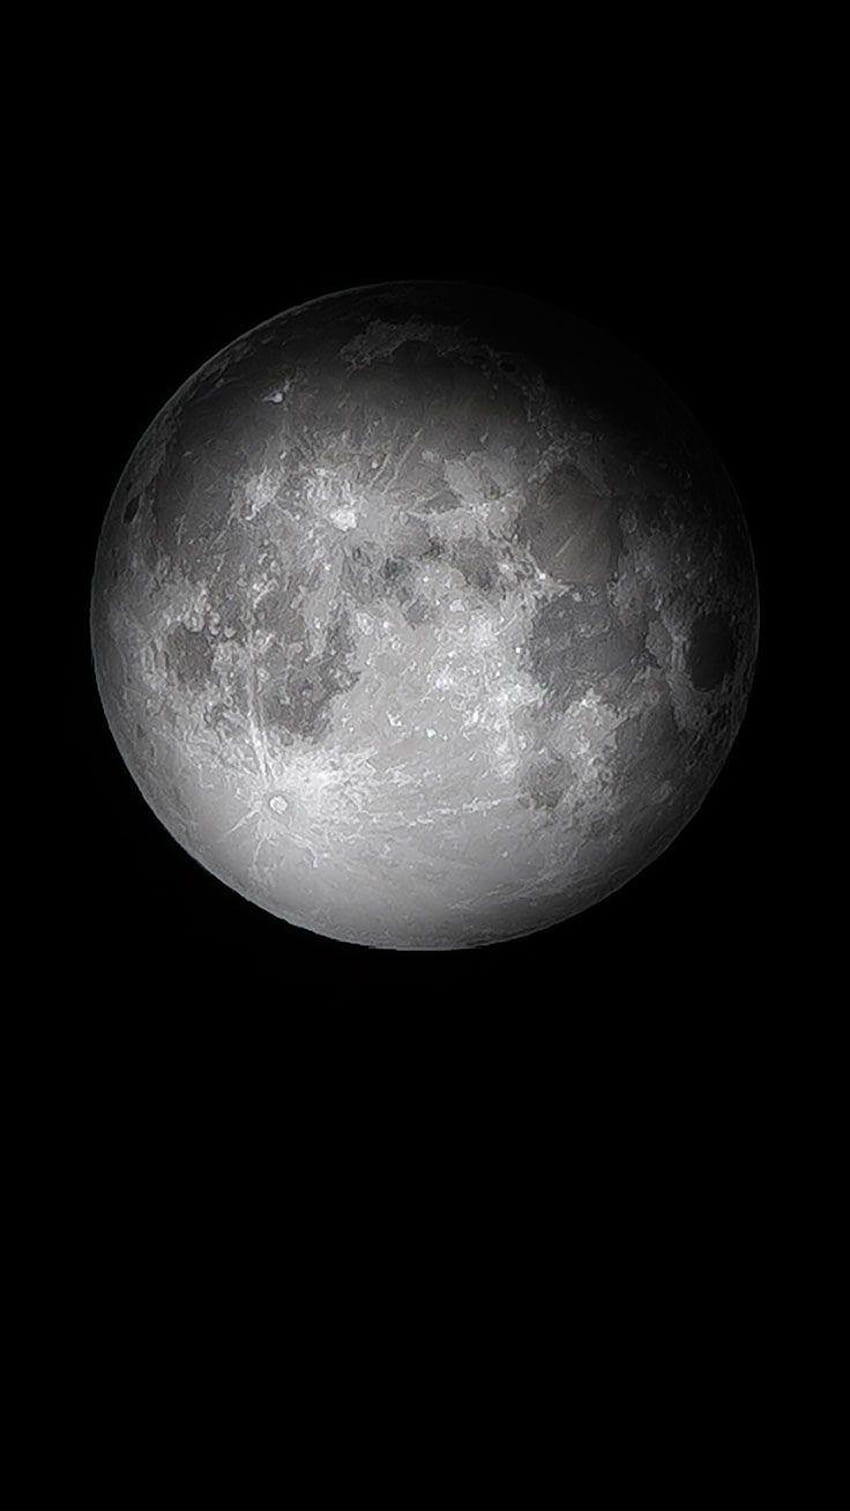 31 To Perfectly Match Your New Black iPhone 7, the moon HD phone wallpaper